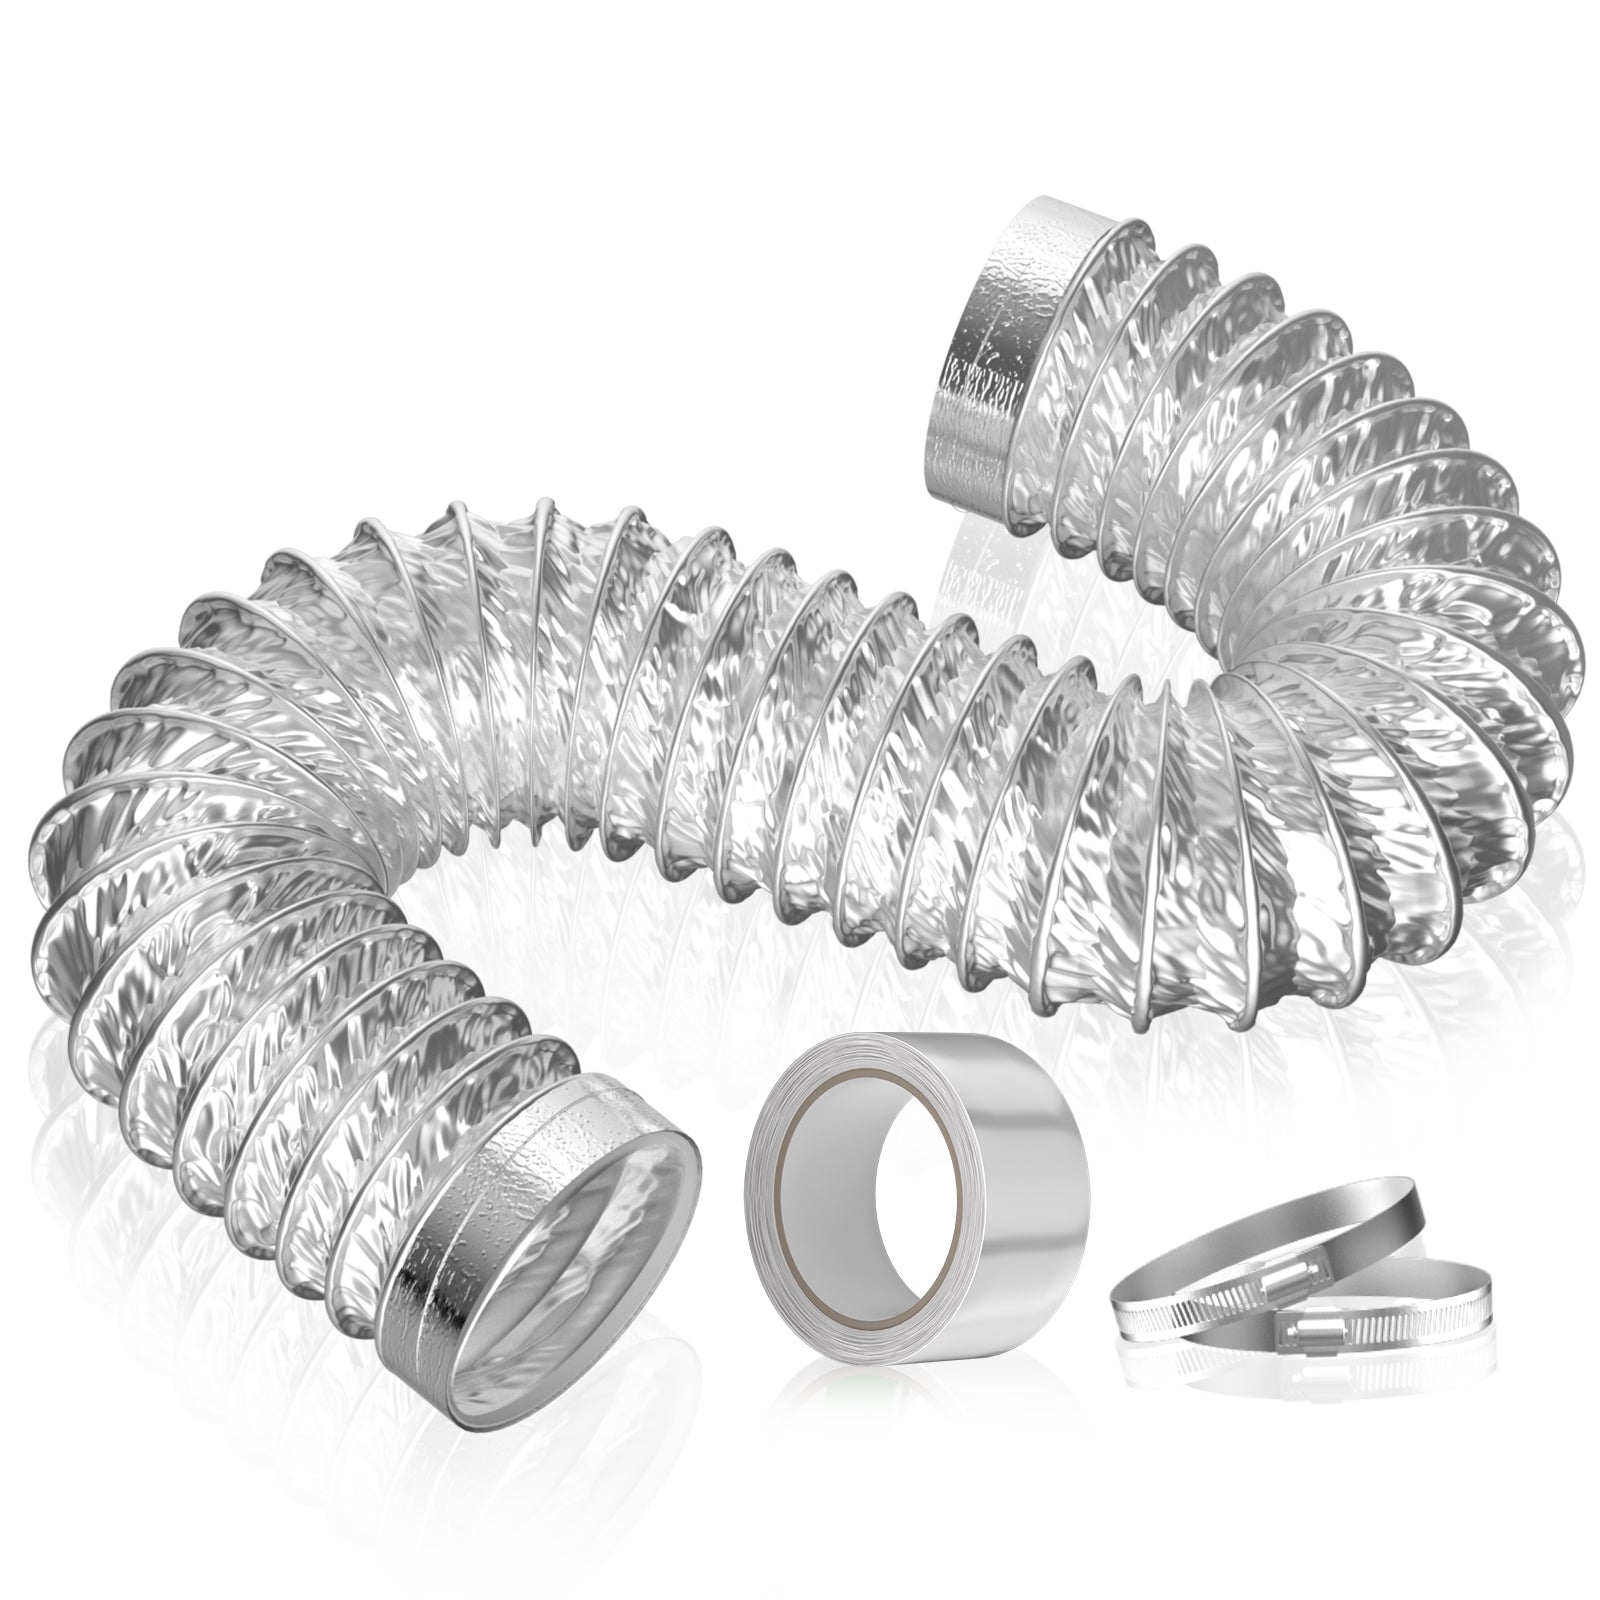 Heavy Duty Flexible Exhaust Duct Hose, Thick(6-ply) Aluminum Foil Insulated for Tight Space with 2 Clamps and 1 Tape